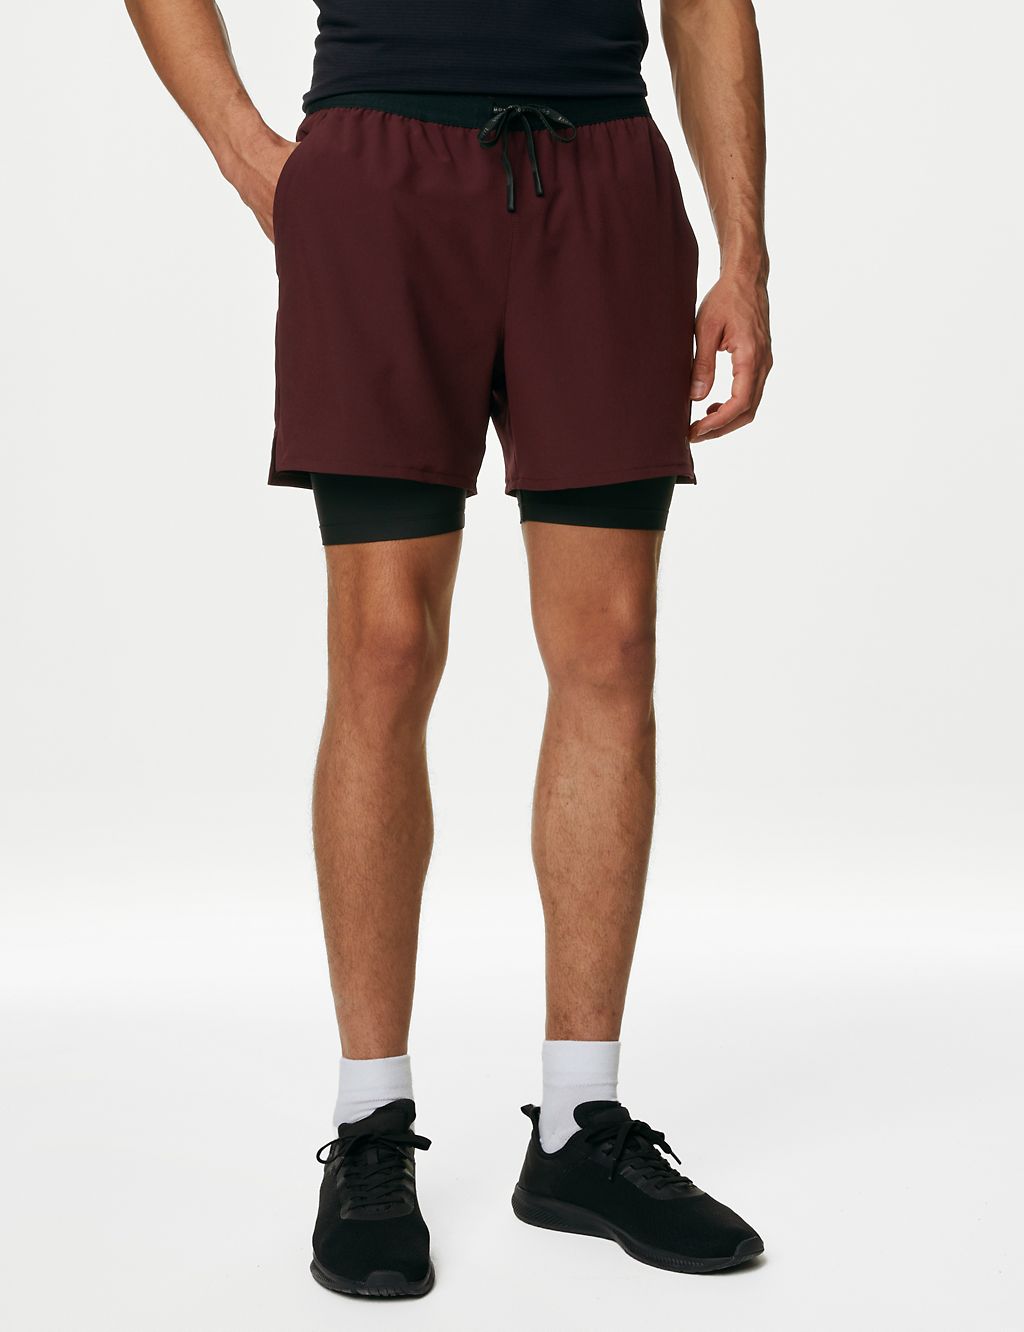 Double Layer Training Shorts | Goodmove | M&S